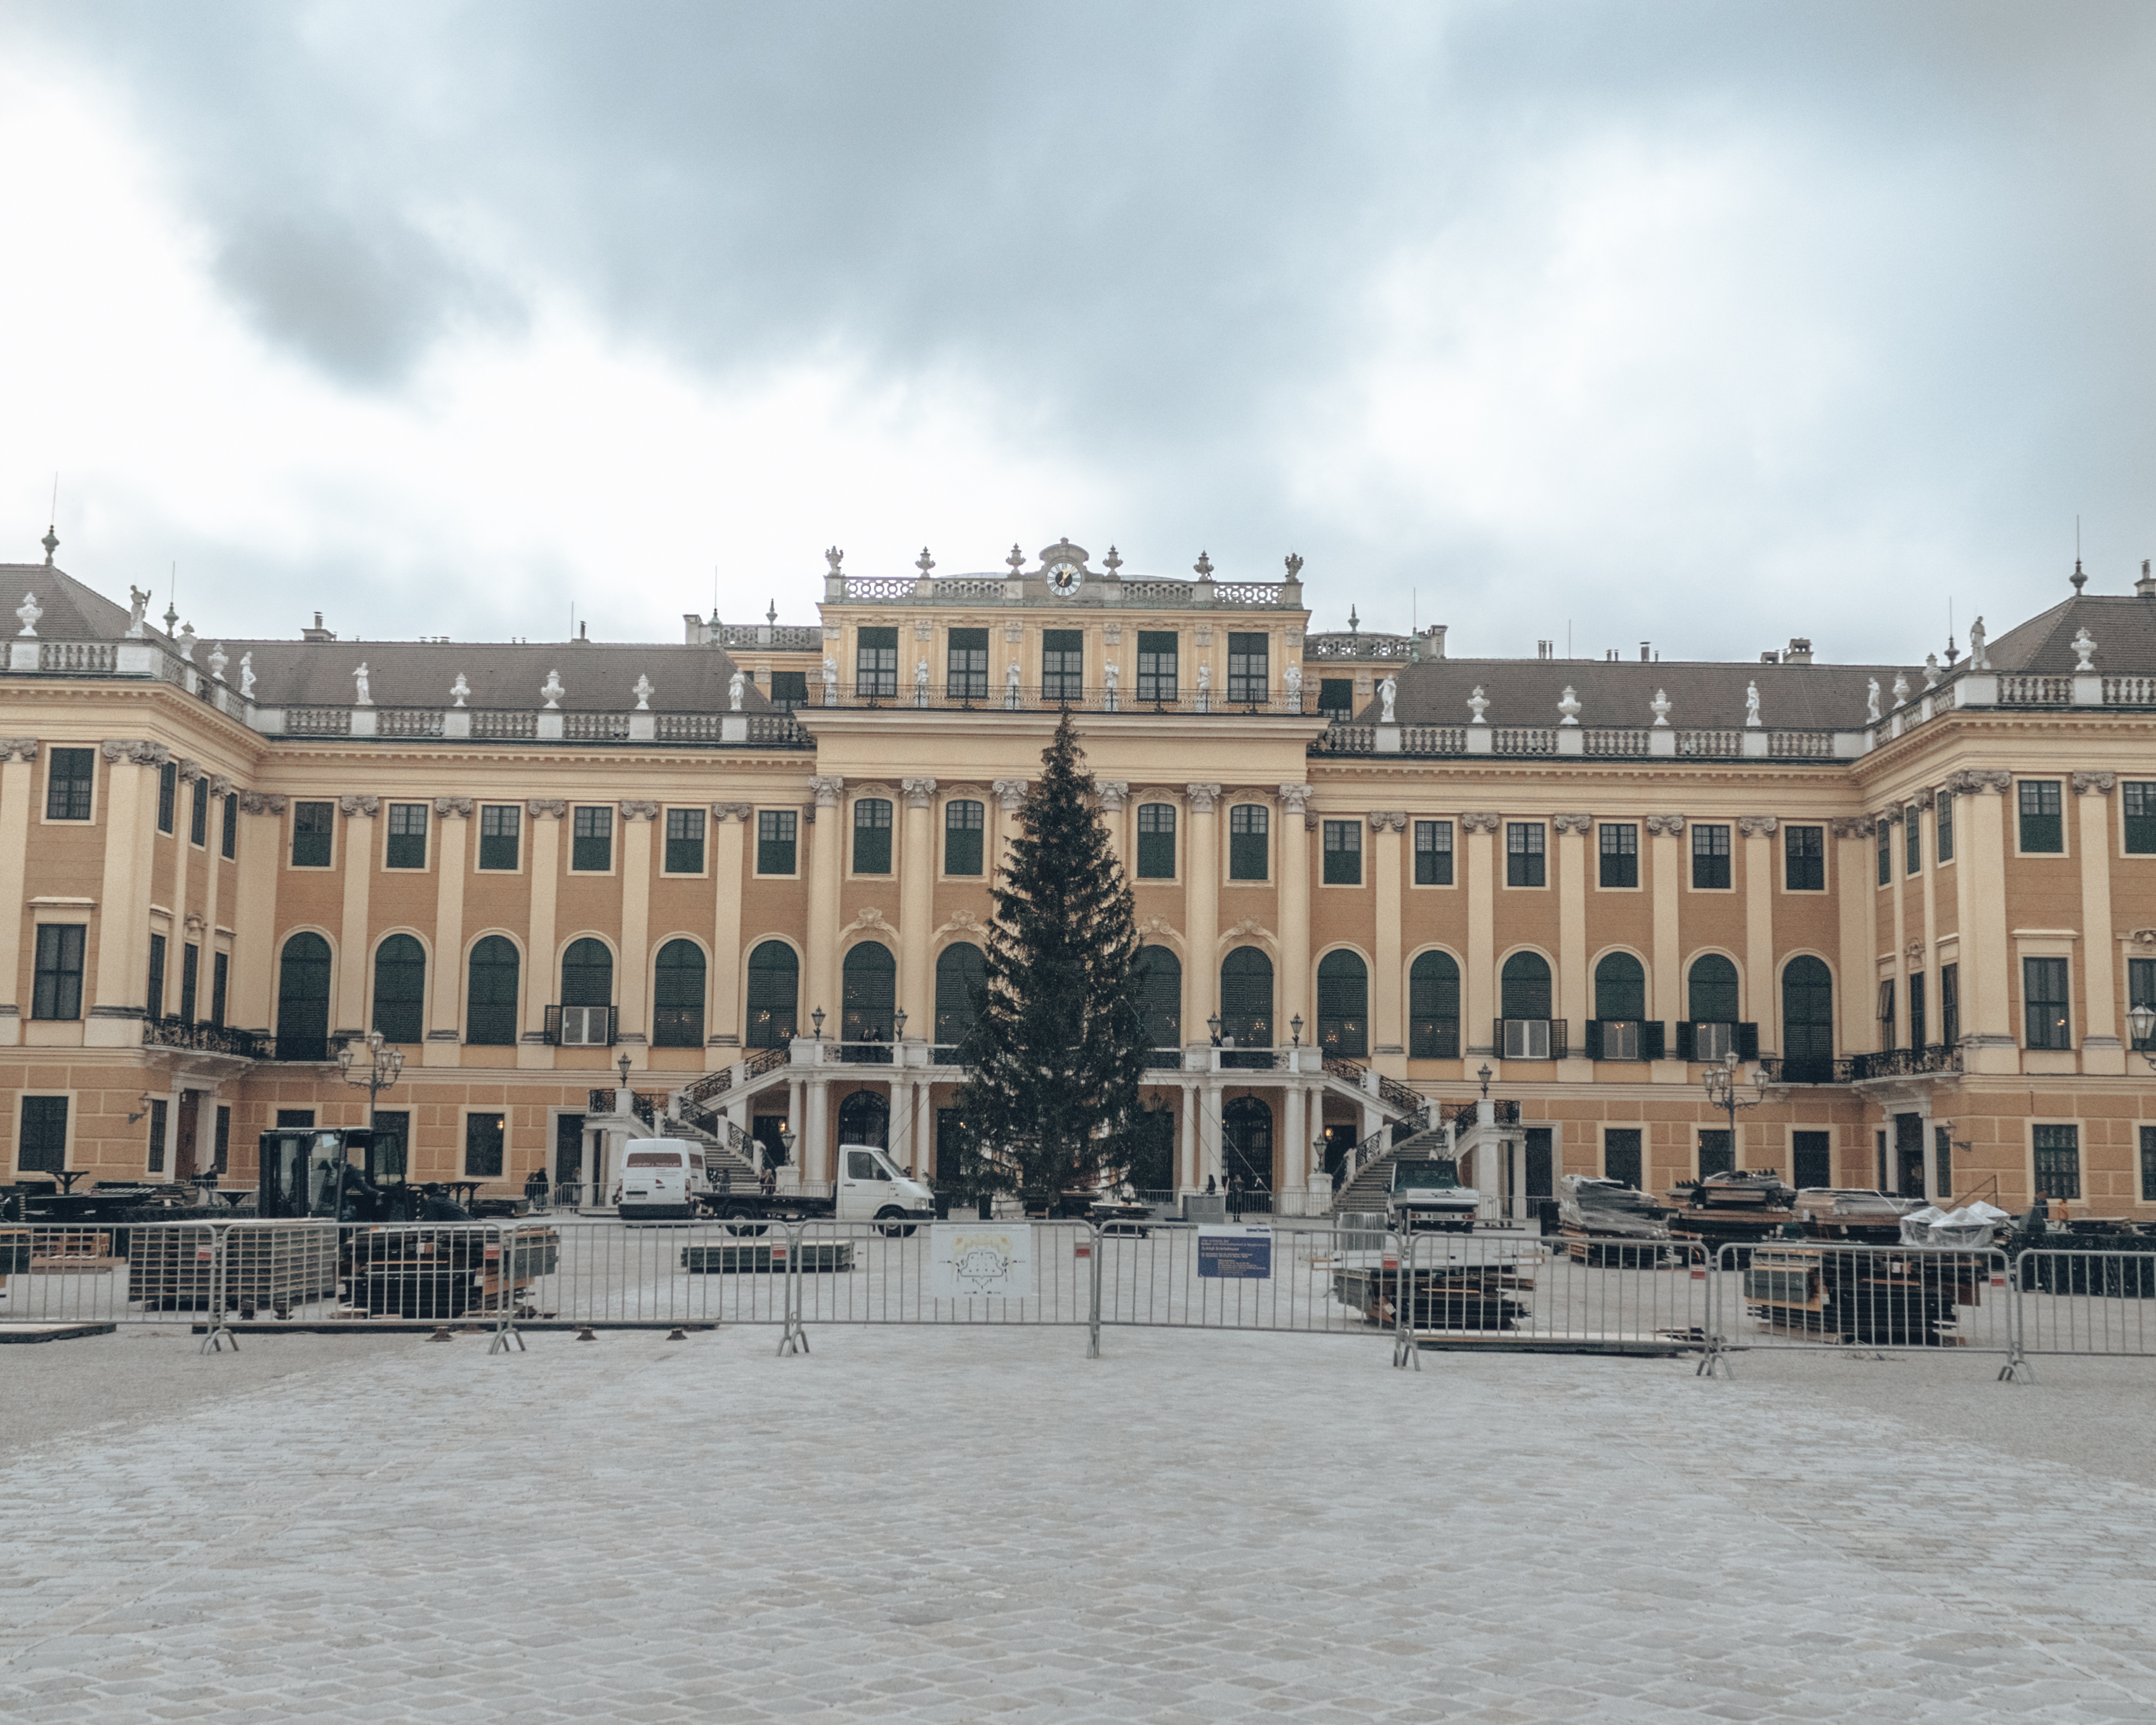 Setting up the Christmas tree in front of the Schönbrunn Palace in Vienna, Austria